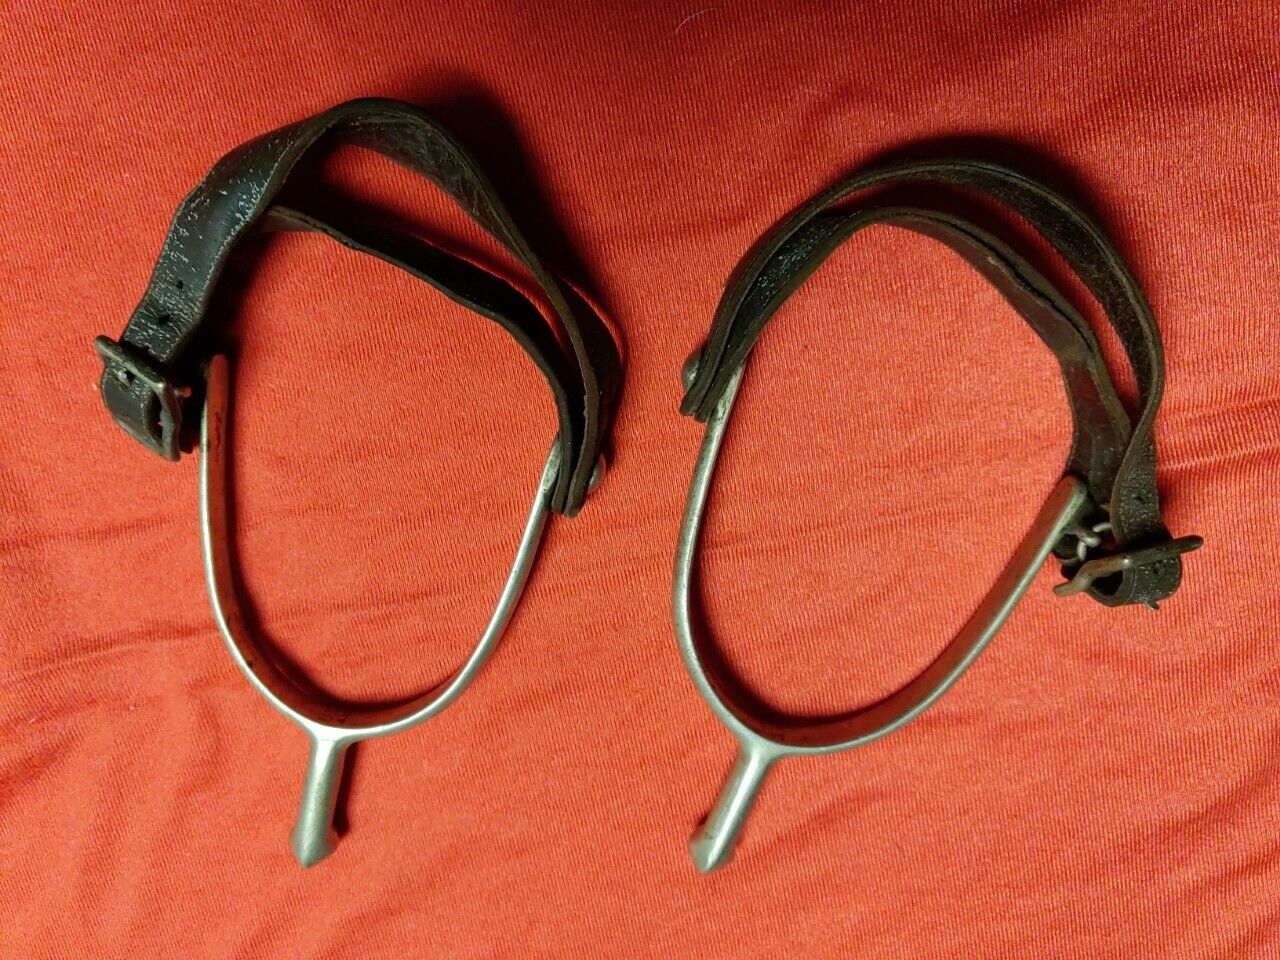 US Army M1911 Cavalry Spurs marked U.S. / A. B. with leather straps